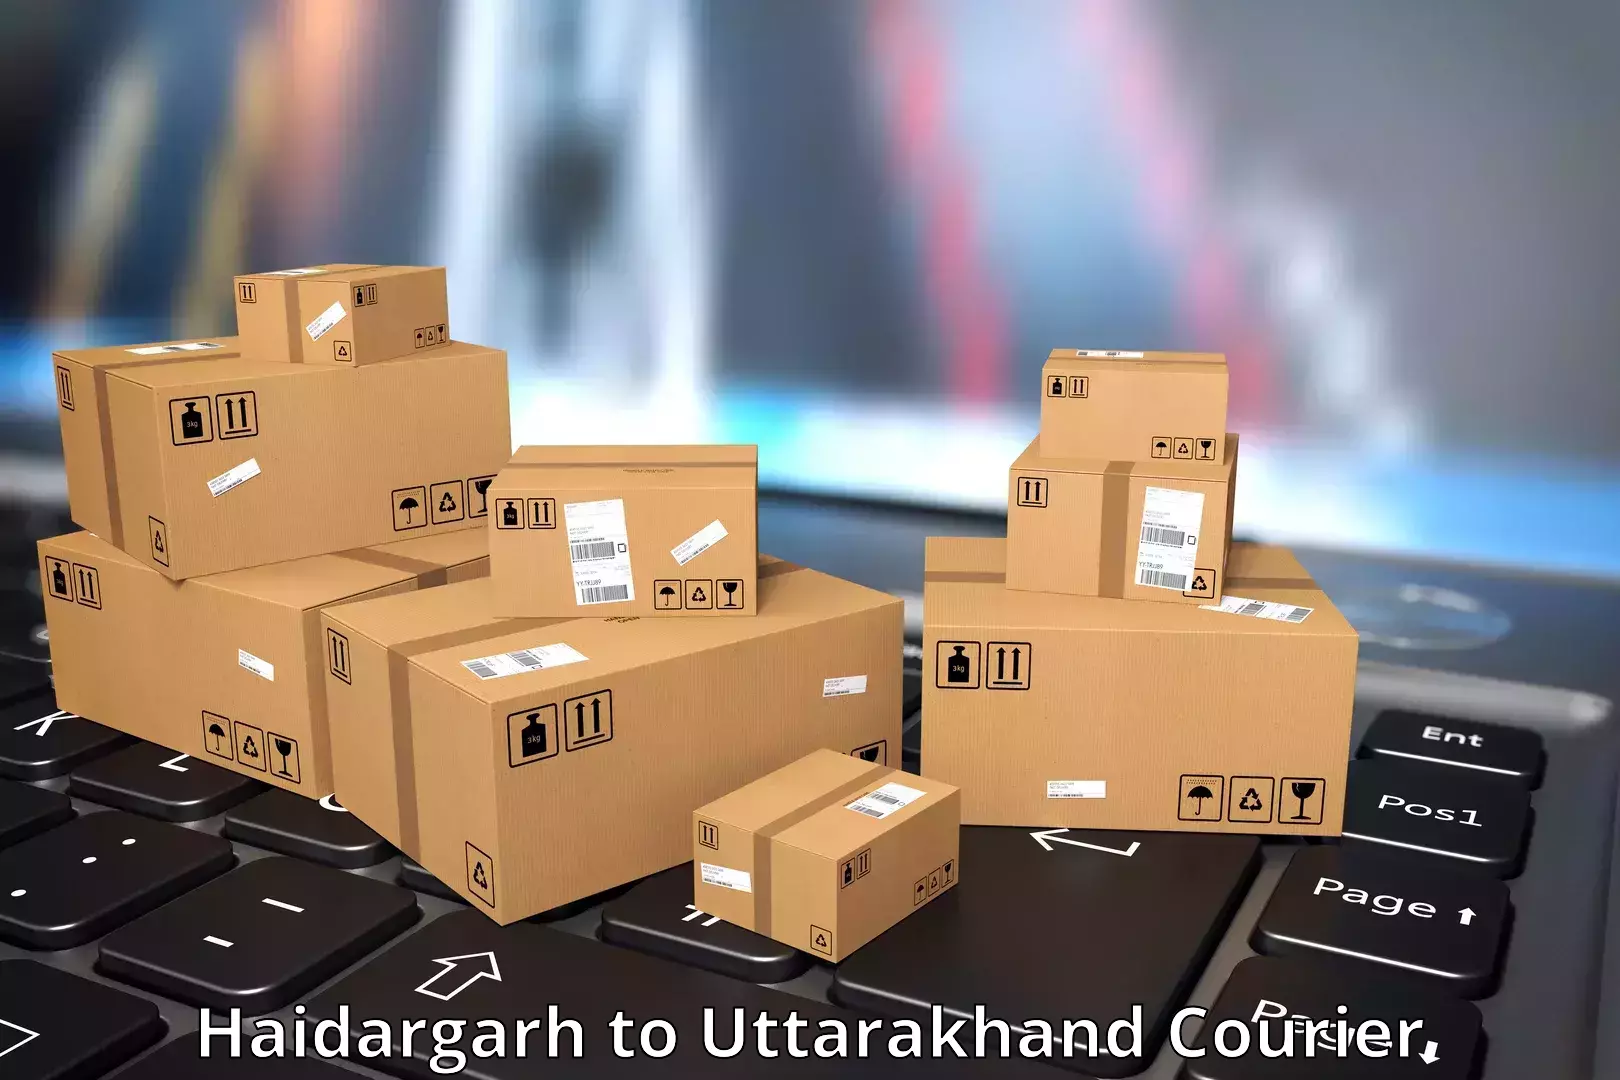 Return courier service in Haidargarh to Paithani